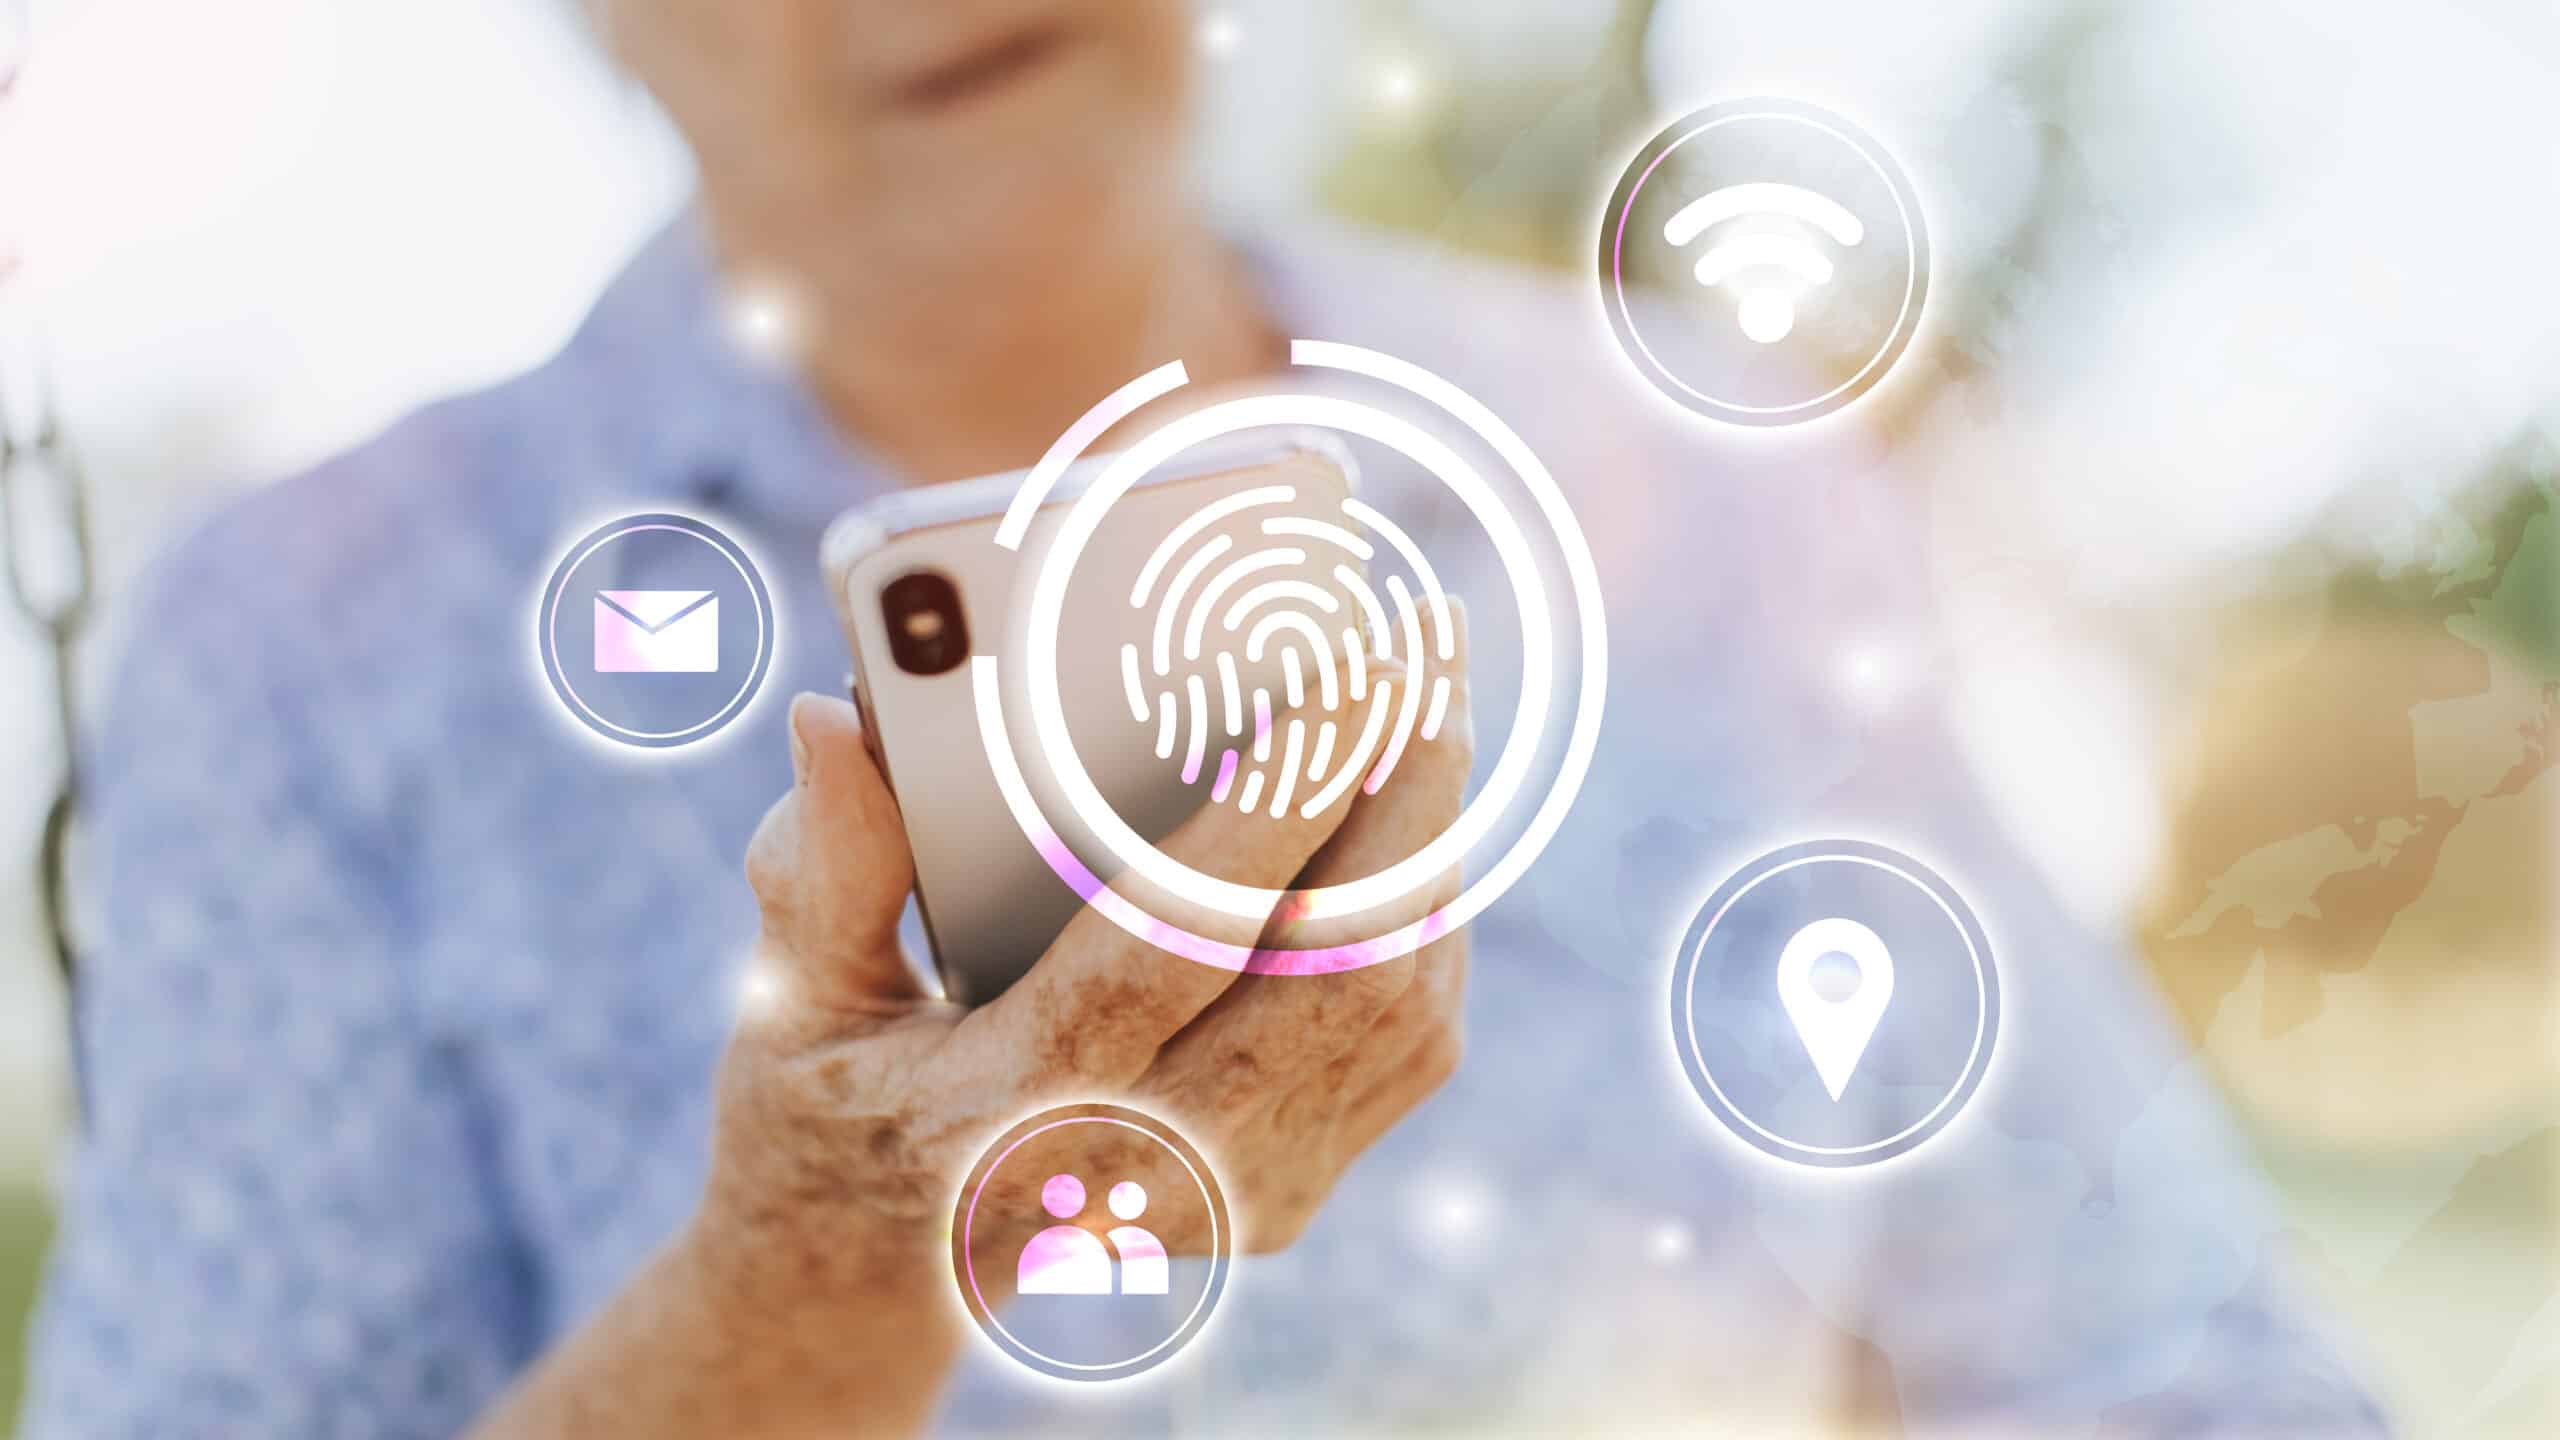 How Identity Verification Can Prevent Fraudulent Activities